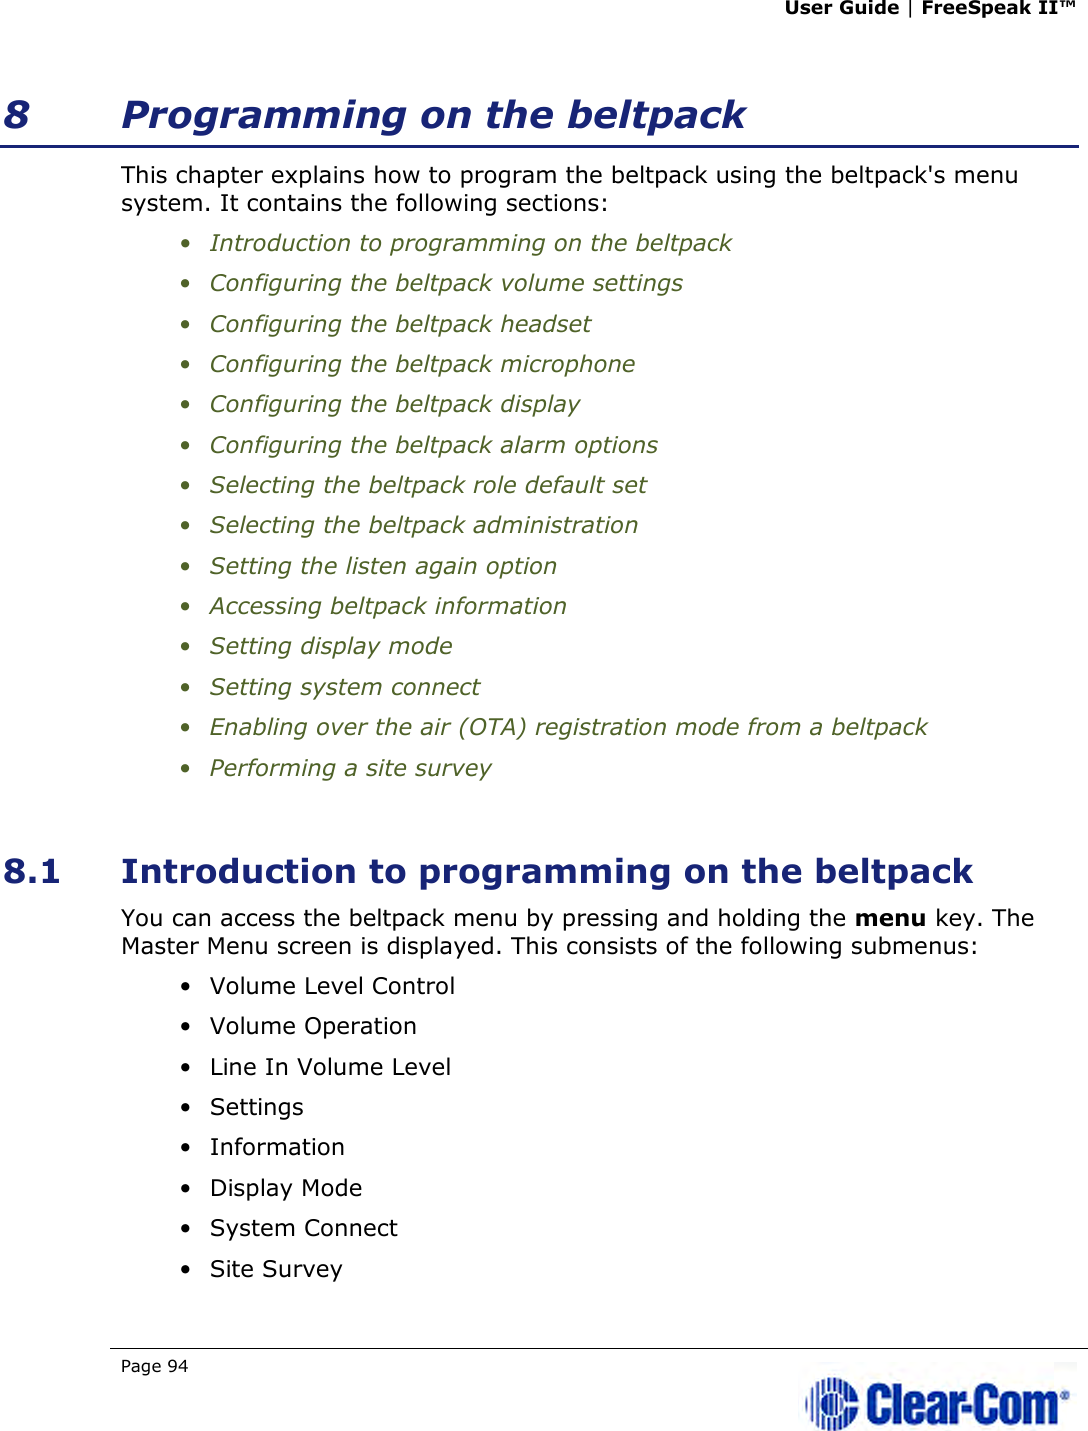 User Guide | FreeSpeak II™  Page 94   8 Programming on the beltpack This chapter explains how to program the beltpack using the beltpack&apos;s menu system. It contains the following sections: • Introduction to programming on the beltpack • Configuring the beltpack volume settings  • Configuring the beltpack headset • Configuring the beltpack microphone • Configuring the beltpack display • Configuring the beltpack alarm options • Selecting the beltpack role default set • Selecting the beltpack administration • Setting the listen again option  • Accessing beltpack information • Setting display mode • Setting system connect • Enabling over the air (OTA) registration mode from a beltpack • Performing a site survey  8.1 Introduction to programming on the beltpack You can access the beltpack menu by pressing and holding the menu key. The Master Menu screen is displayed. This consists of the following submenus: • Volume Level Control • Volume Operation • Line In Volume Level • Settings • Information • Display Mode • System Connect • Site Survey 